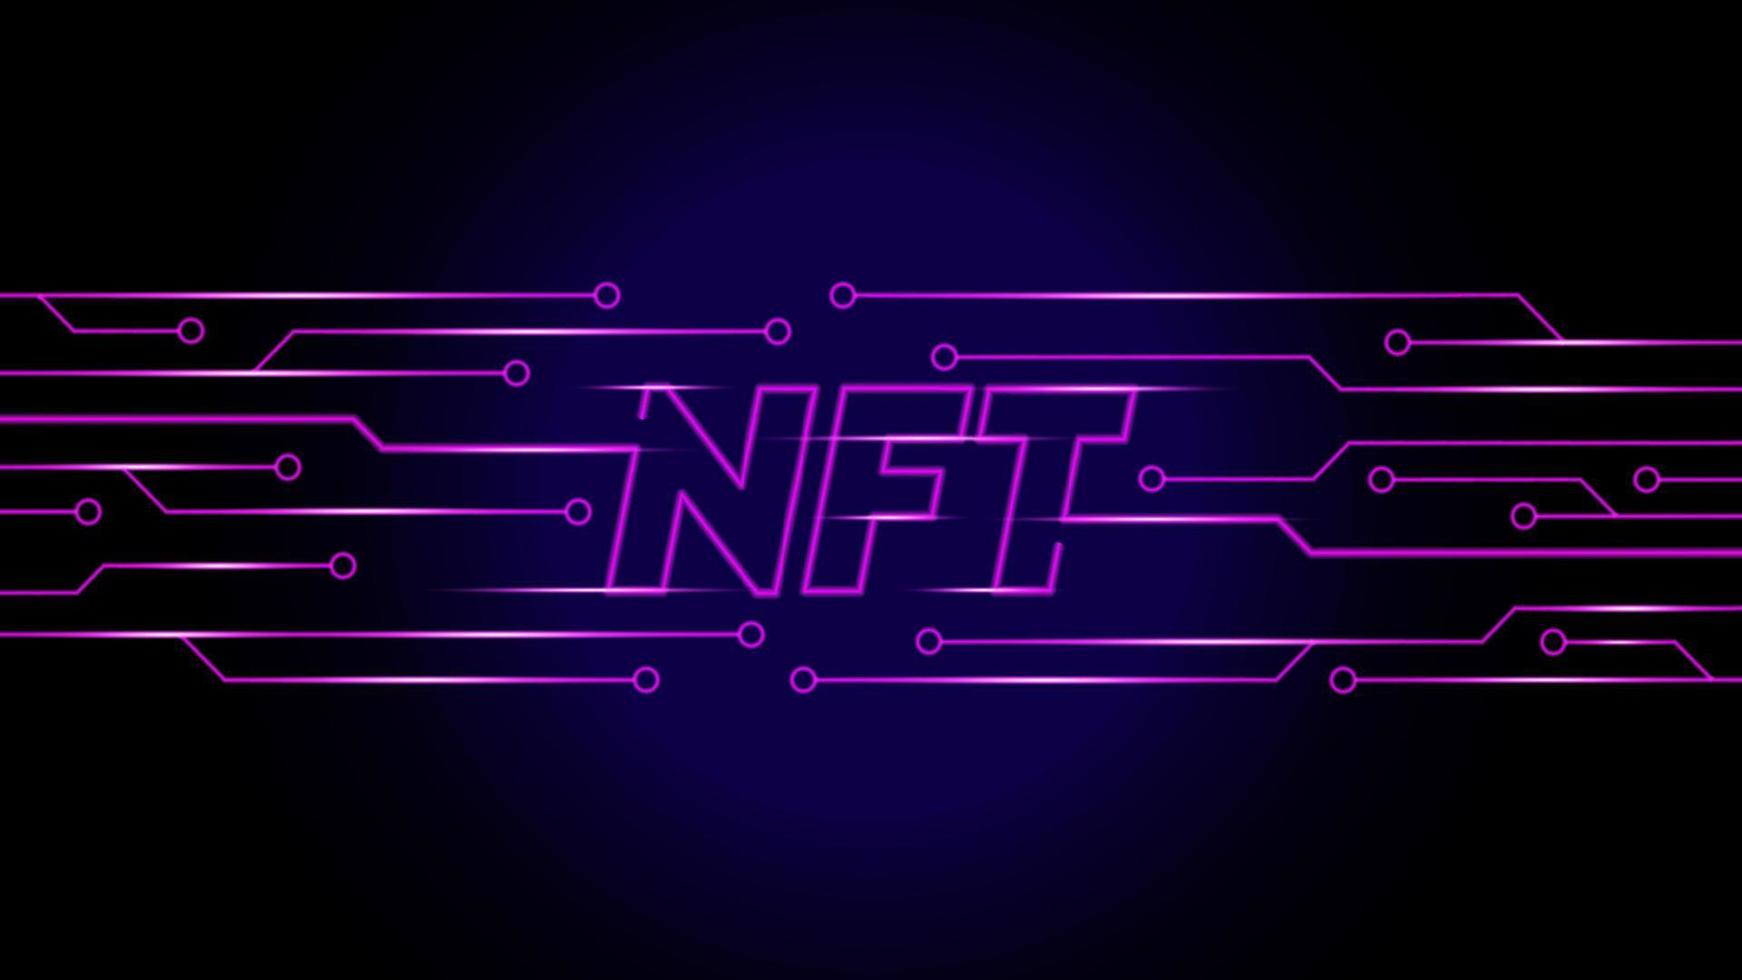 vector concept of NFT non-fungible tokens text in the center of neon line pcb network glowing in dark background.